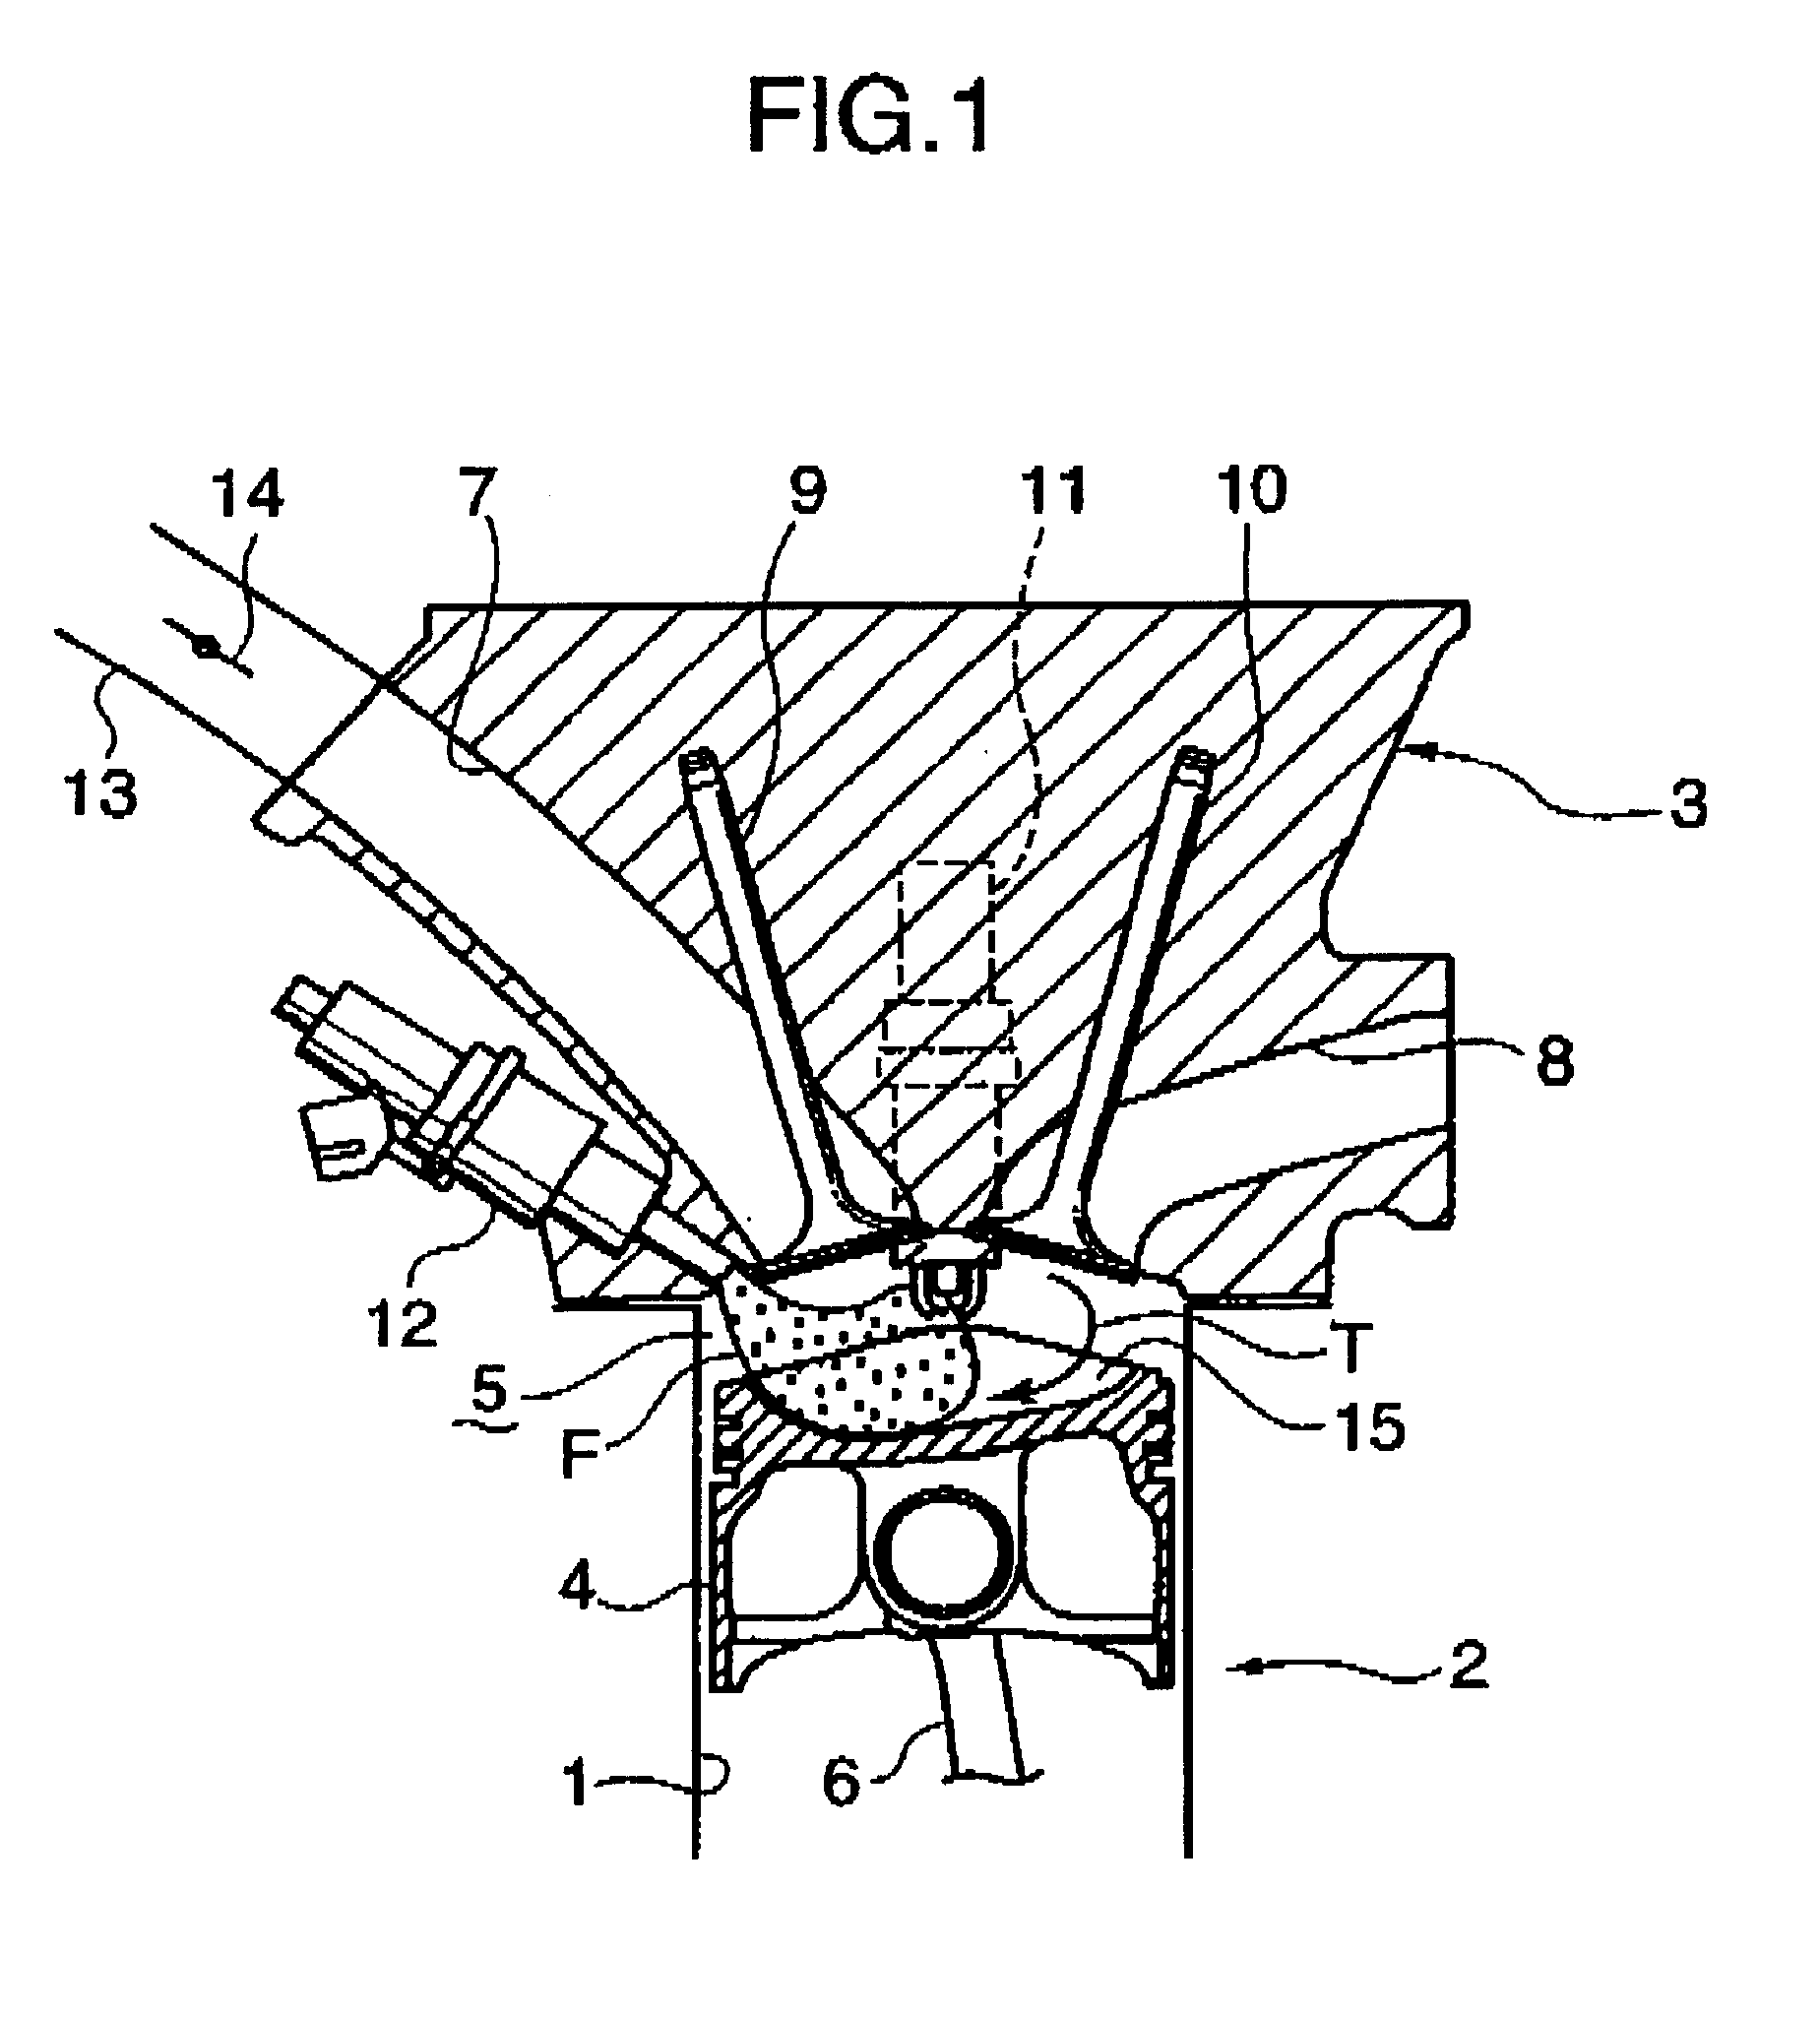 Direct-injection spark-ignition engine